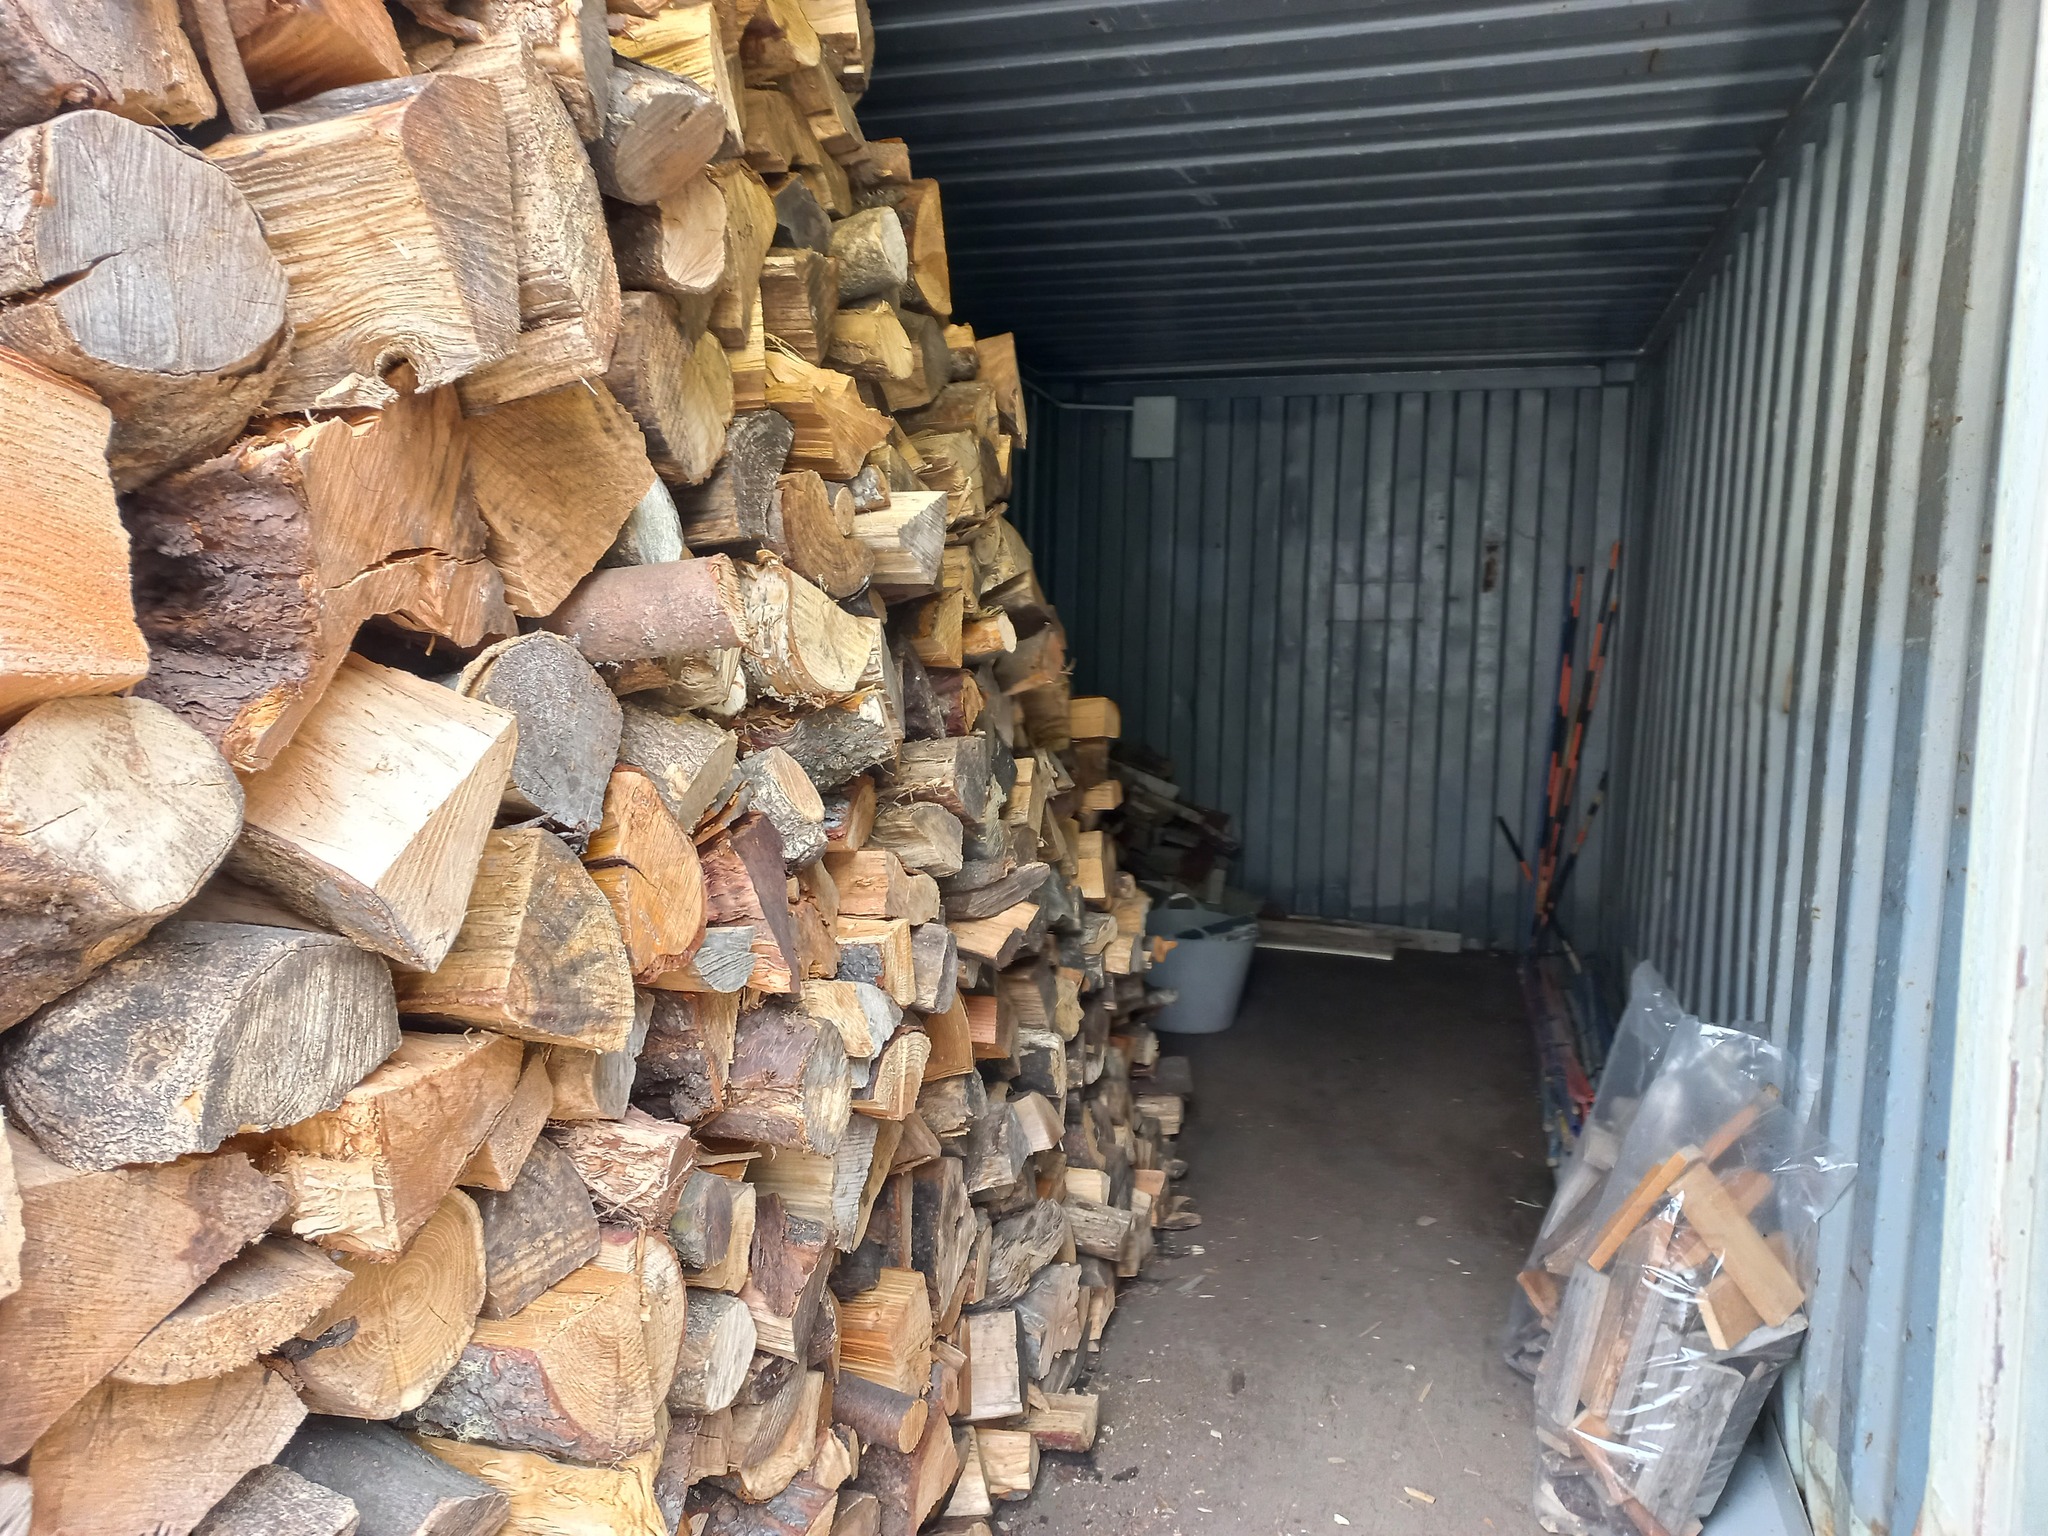 Racking-and-stacking-the-firewood-for-winter